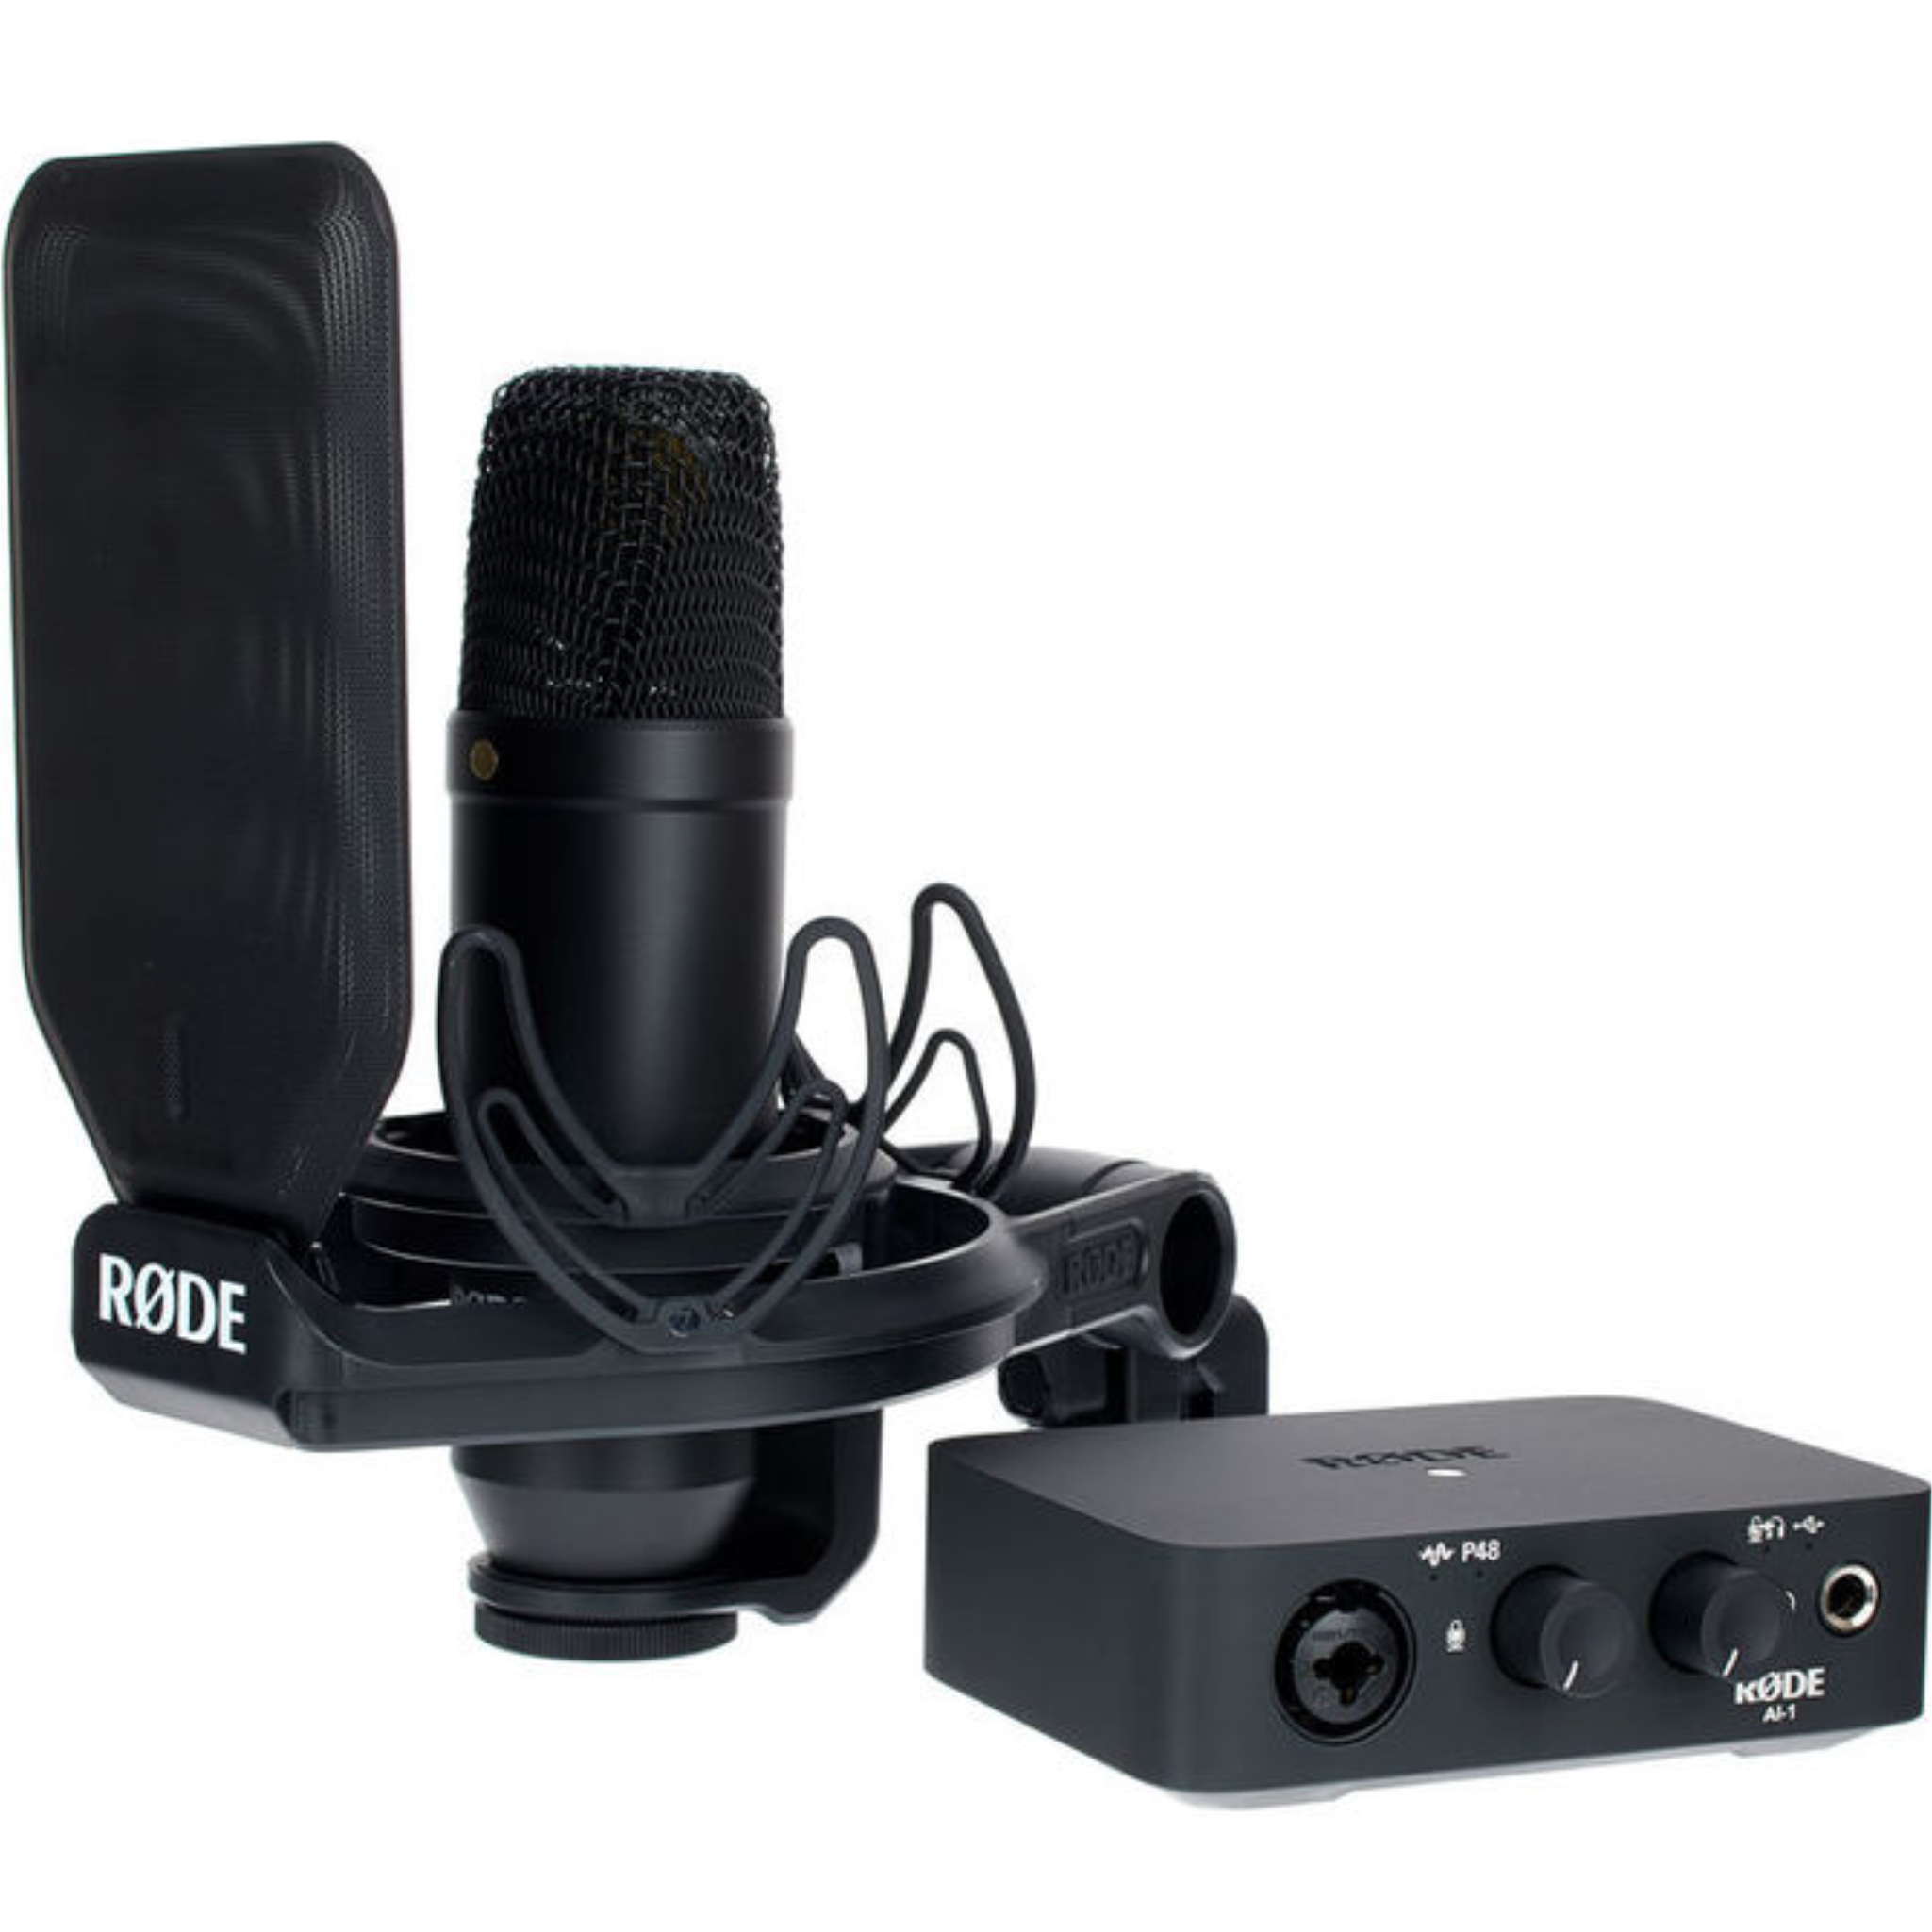 RØDE Microphones Complete Studio Kit with AI-1 Audio Interface, NT1  Microphone, SMR Shockmount, and Cables